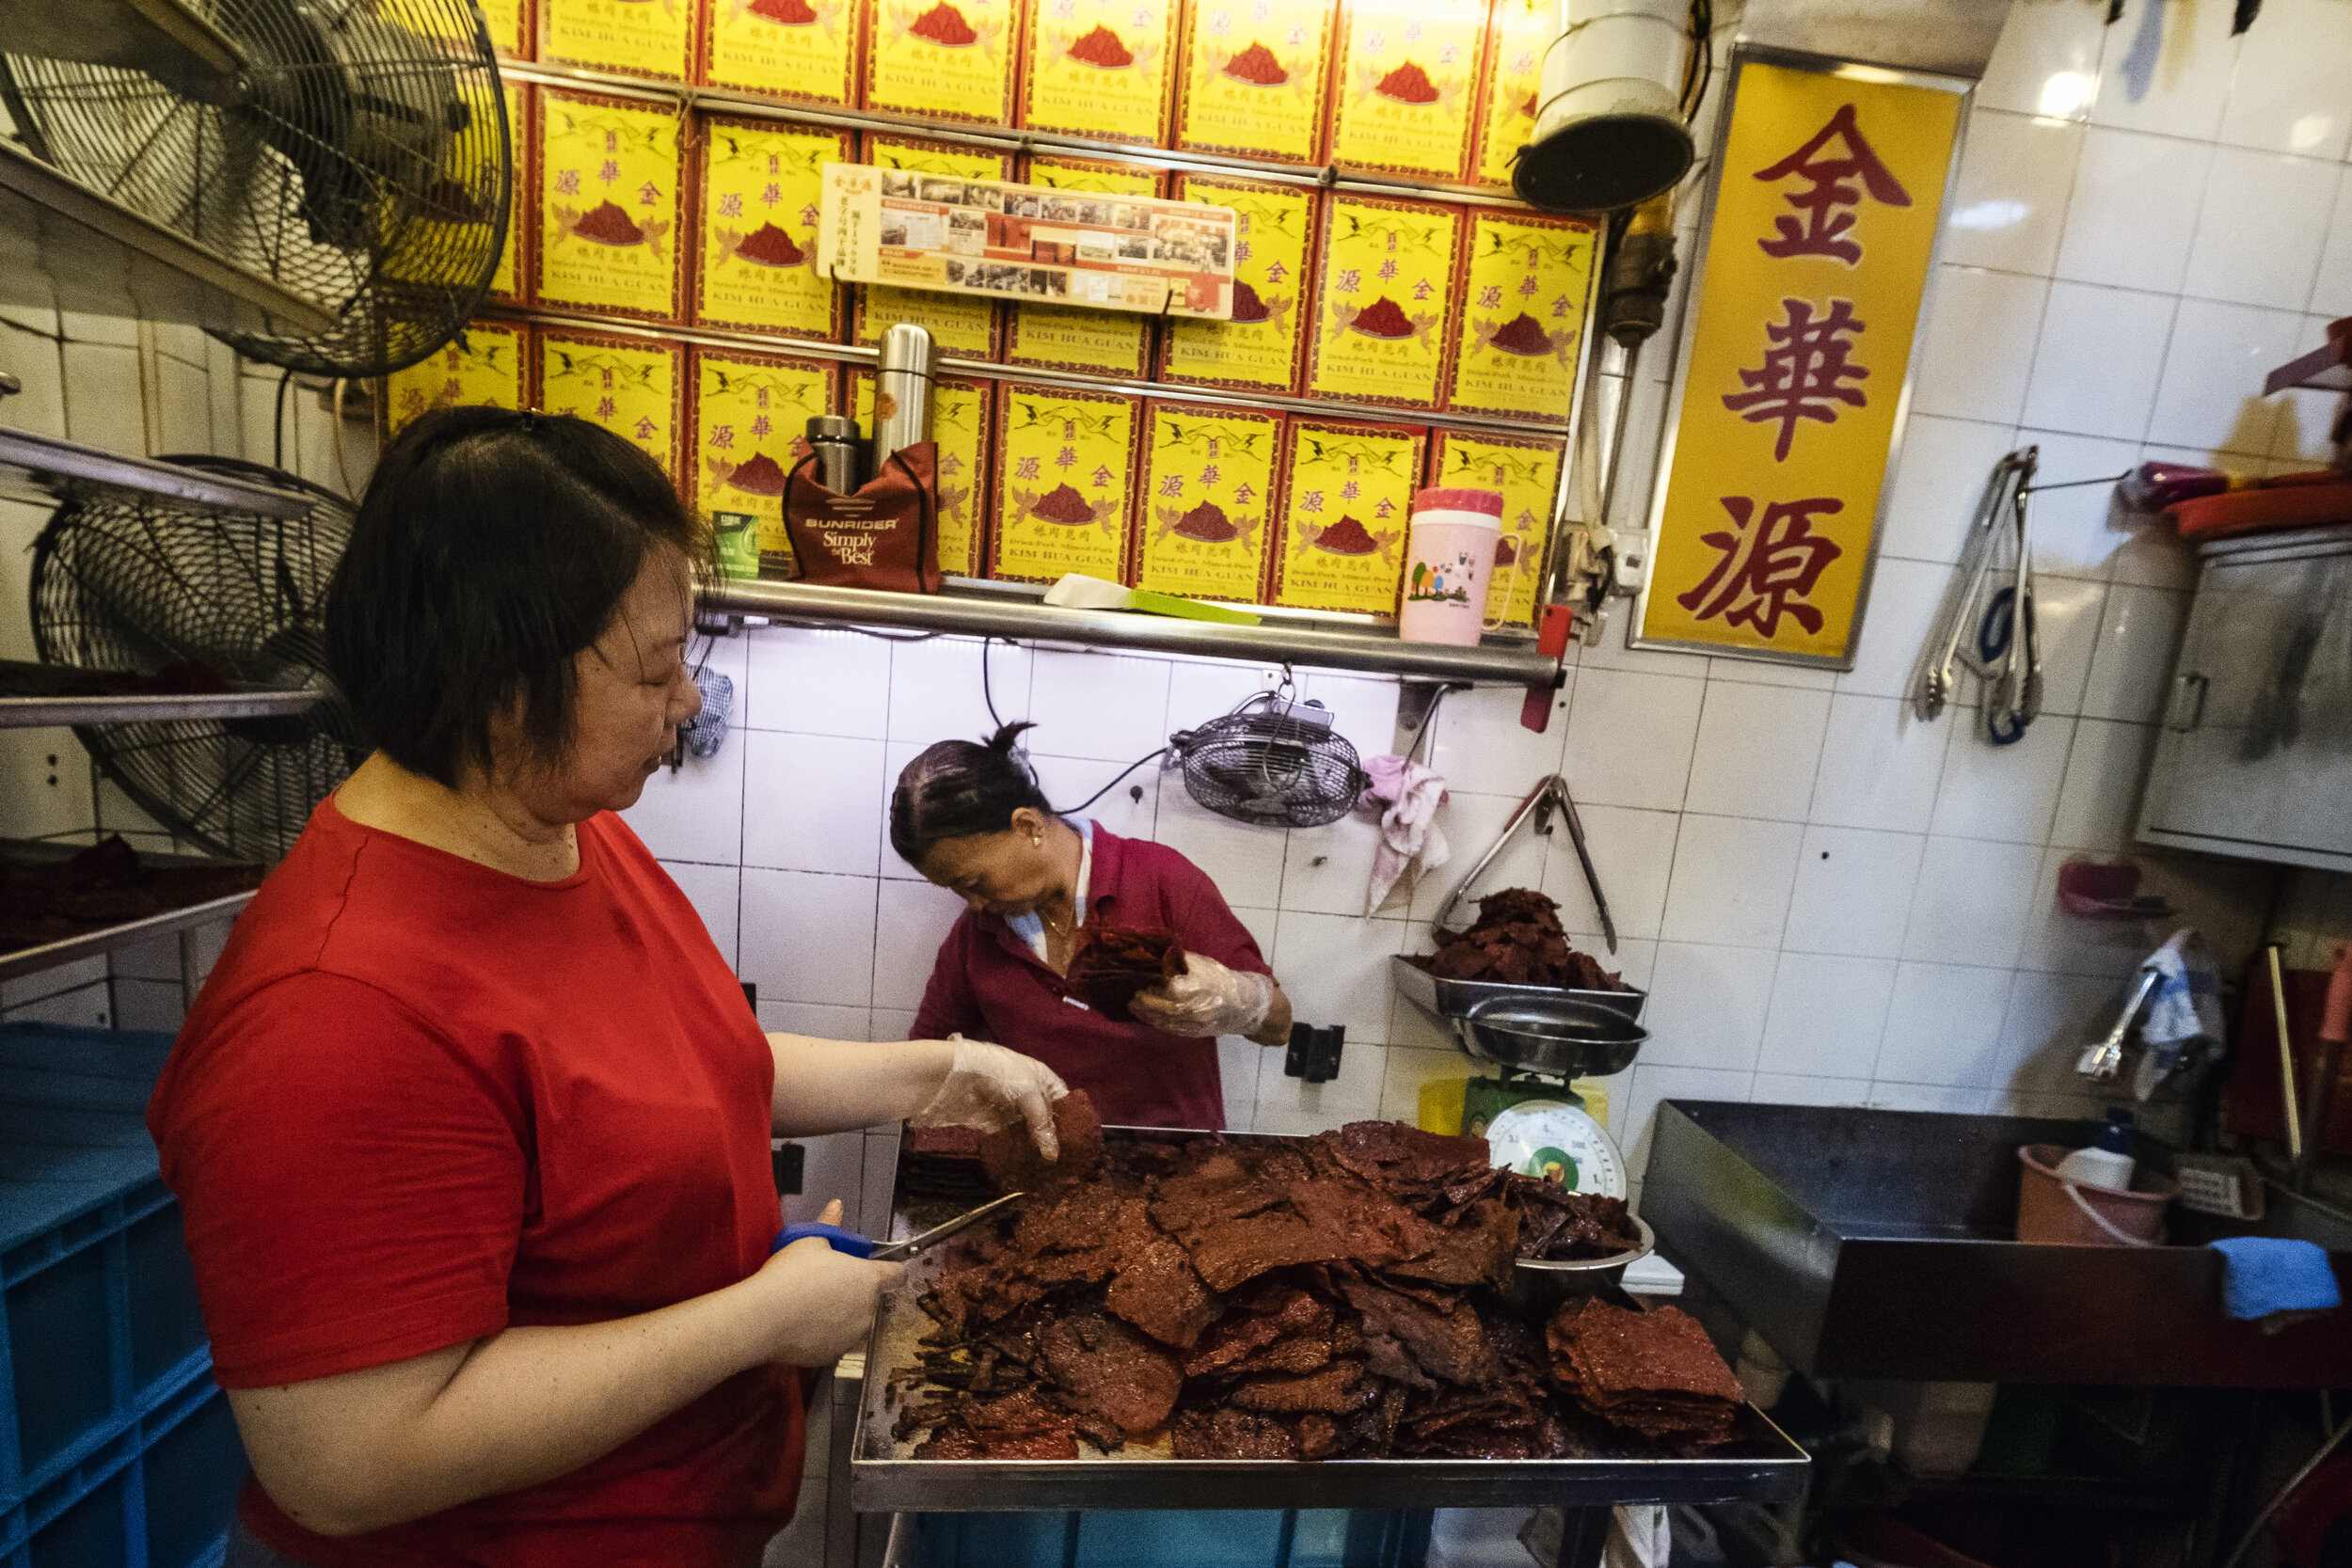  Employees at the back of the stall trim off charred edges of Bak Kwa as they work in the heat and confines of the tight space 